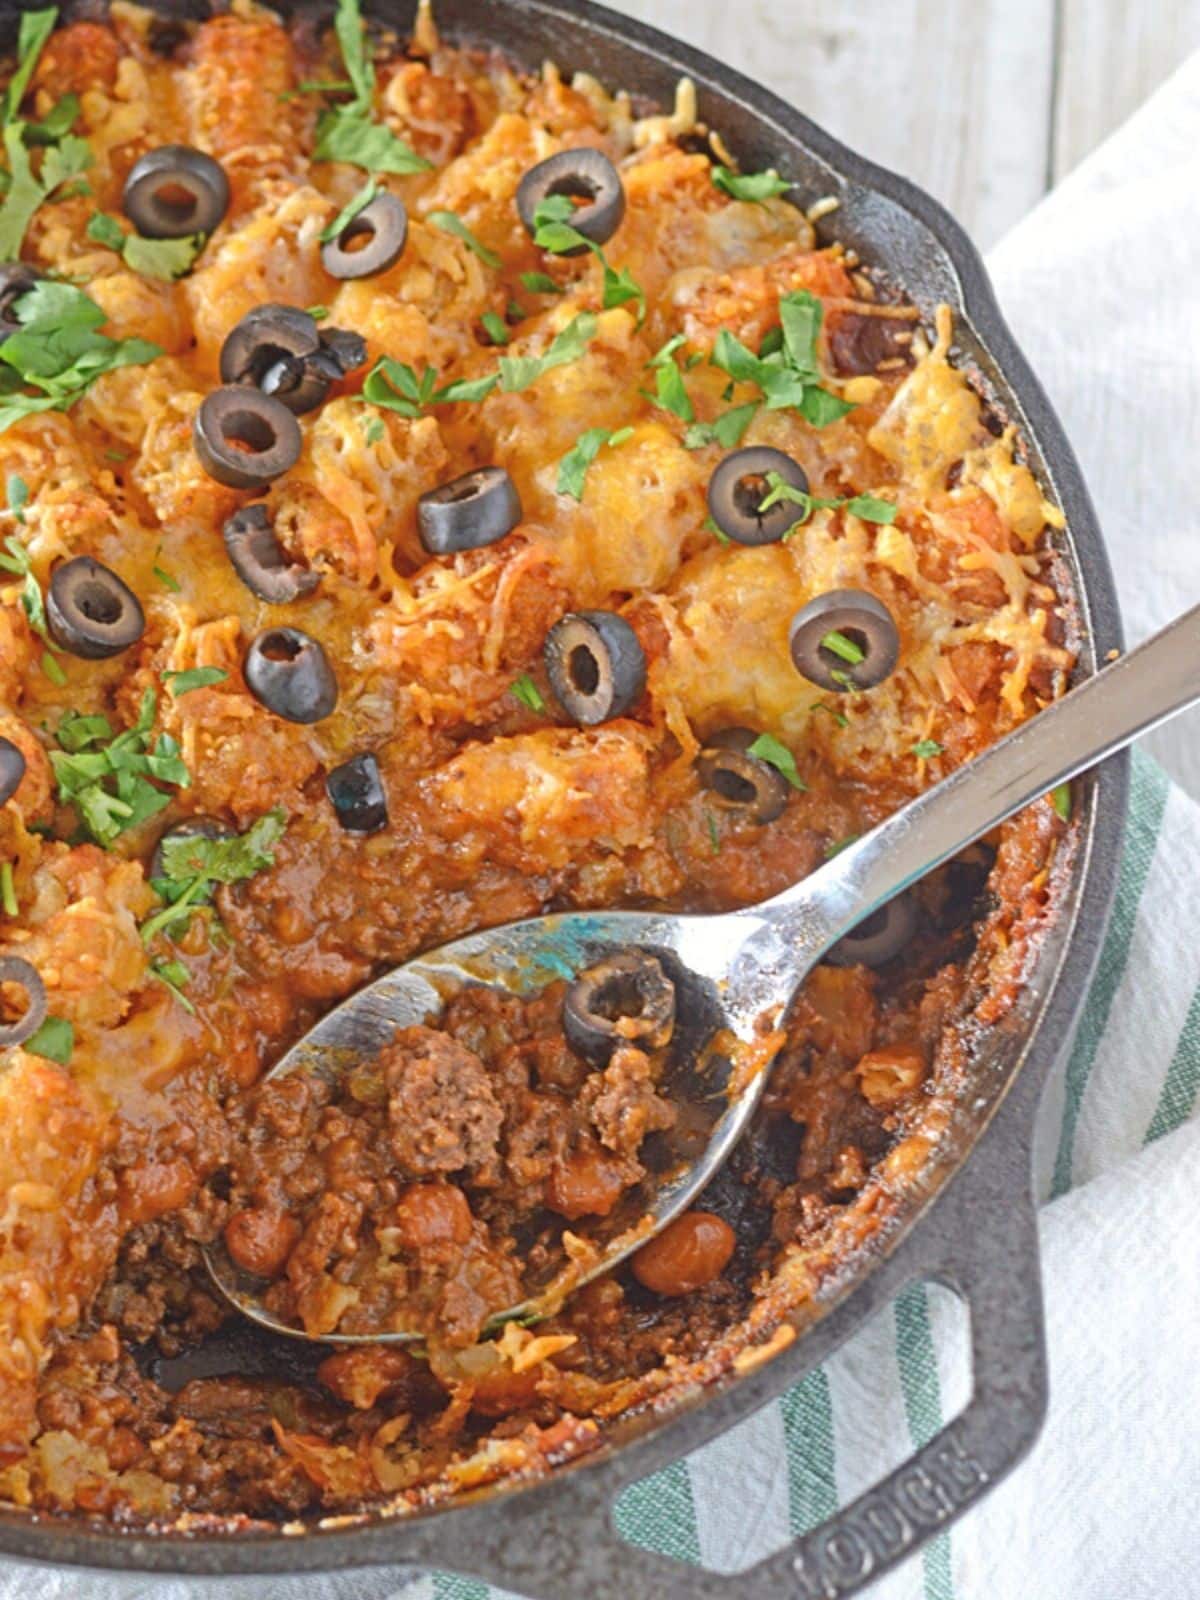 A bird's eye image of a taco tater tot casserole with a spoon in it.